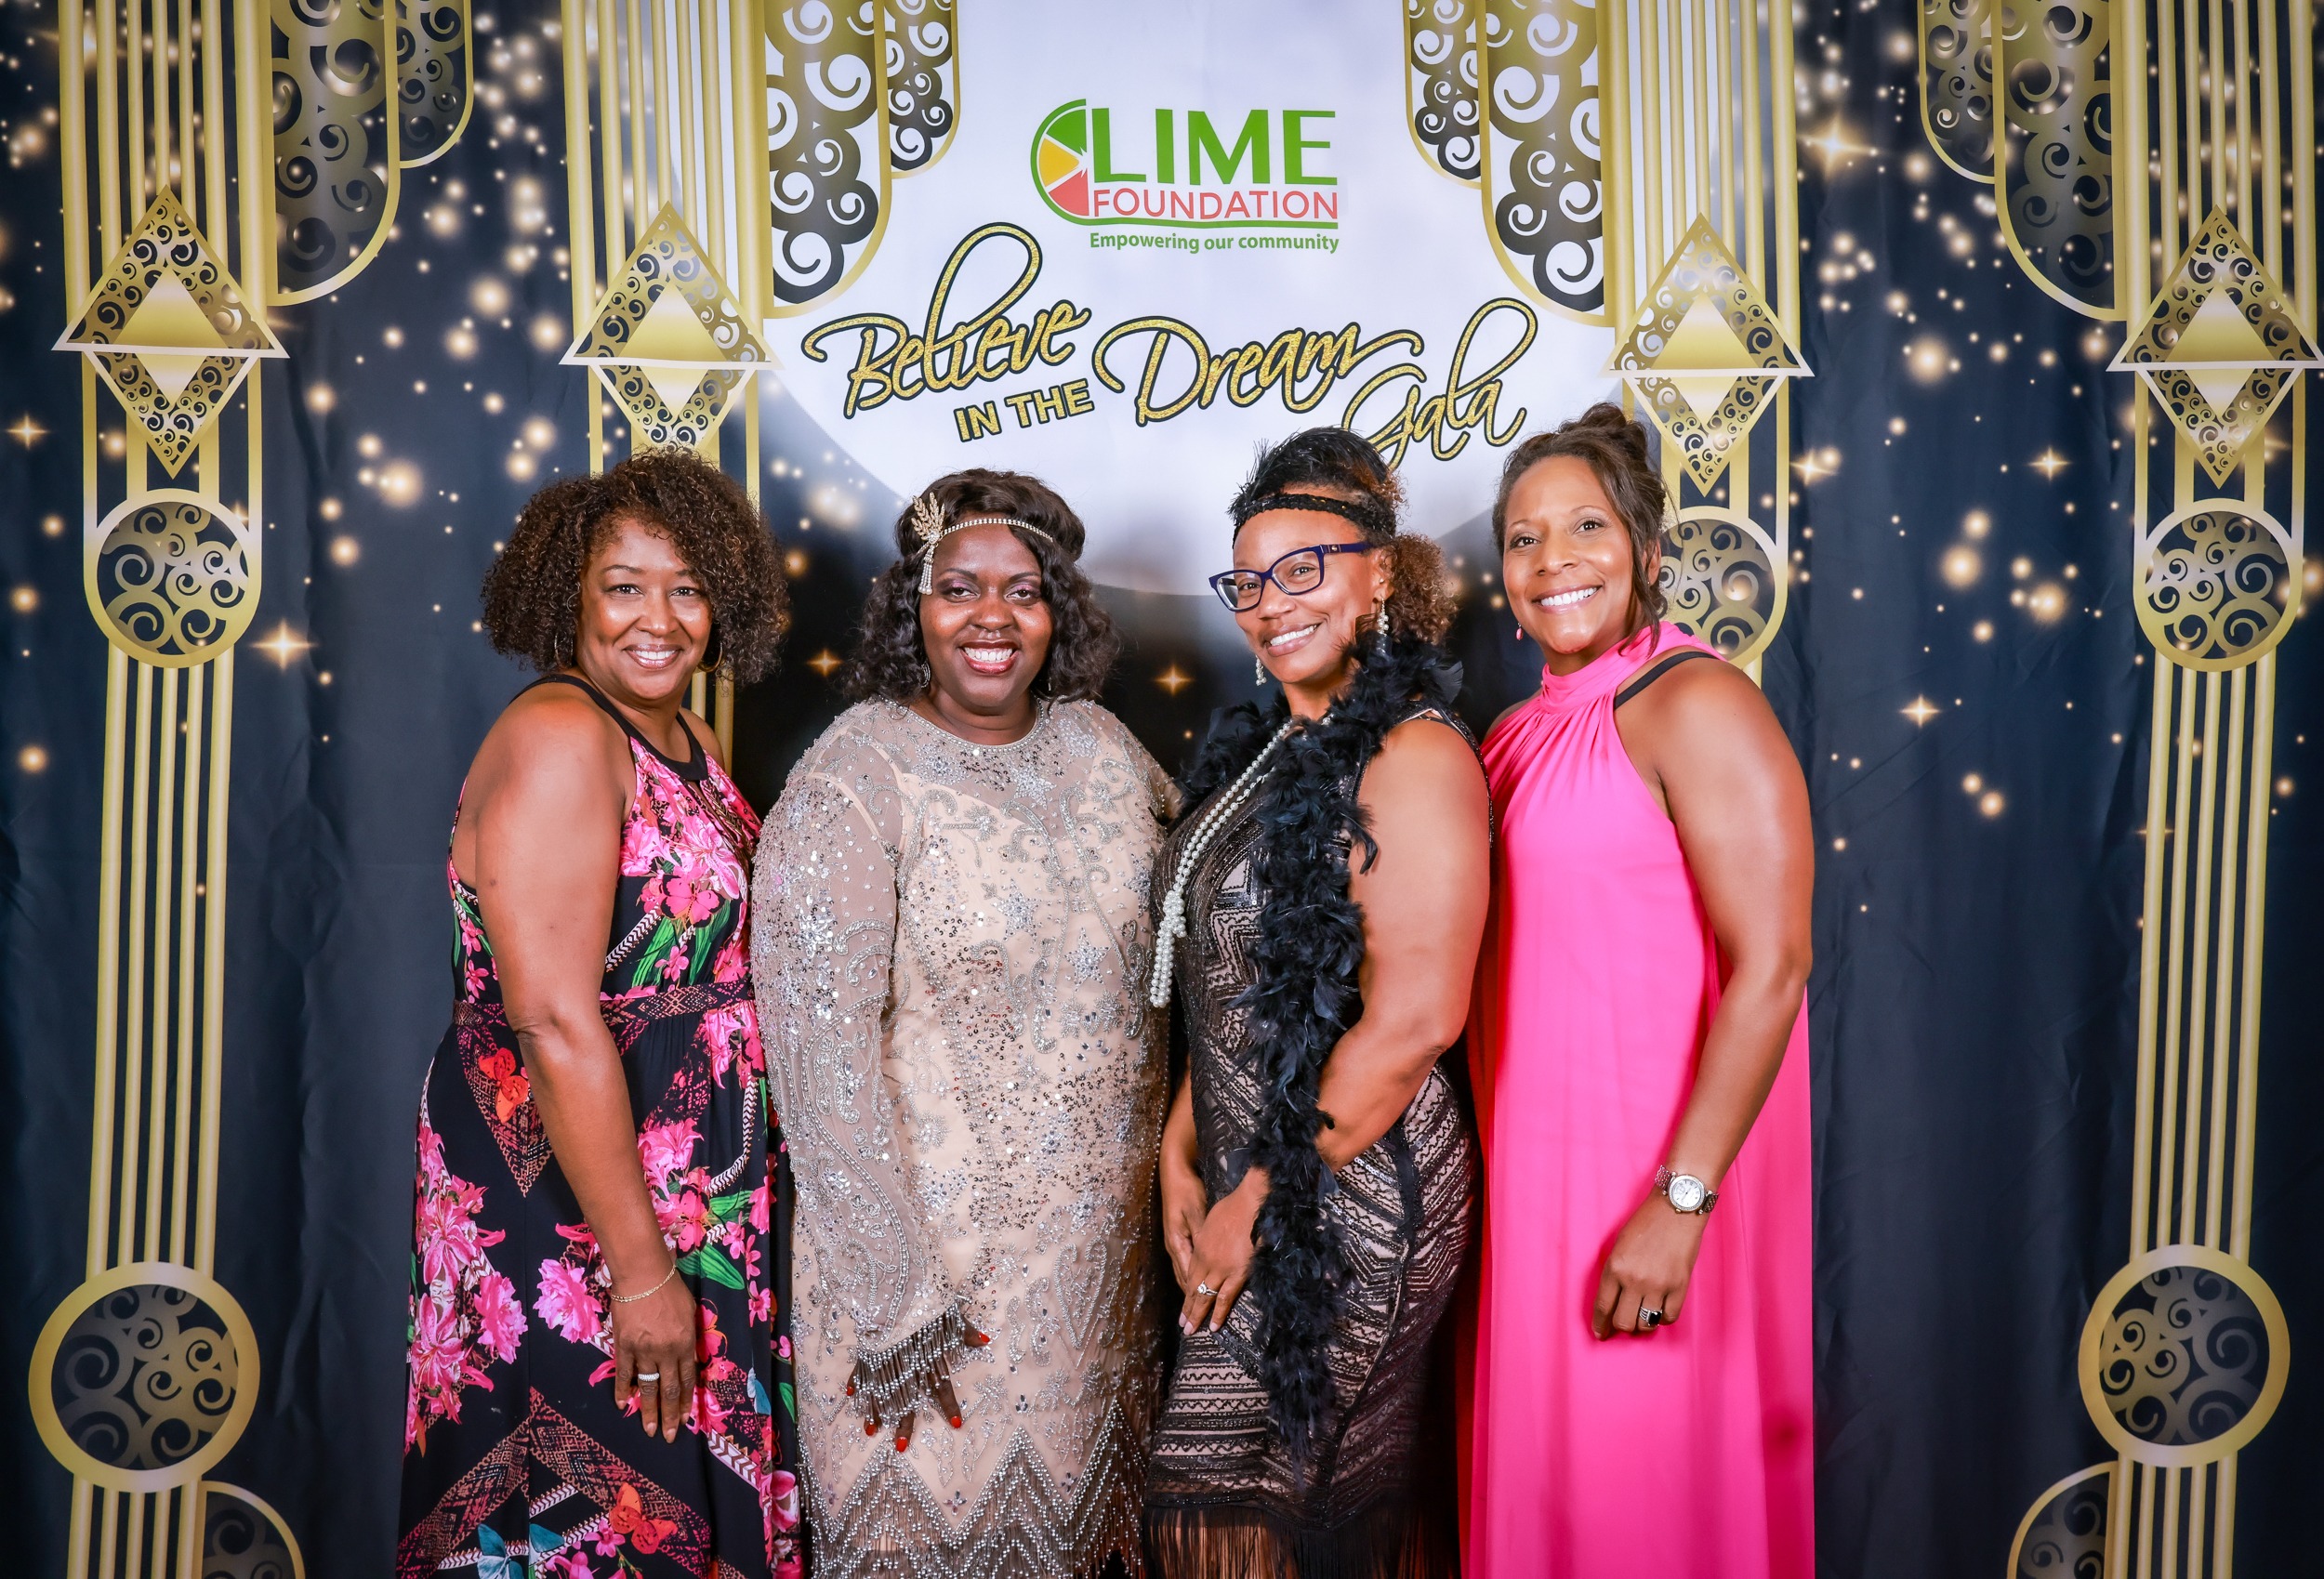 Four women posing for a photo at a LIME Foundation event.